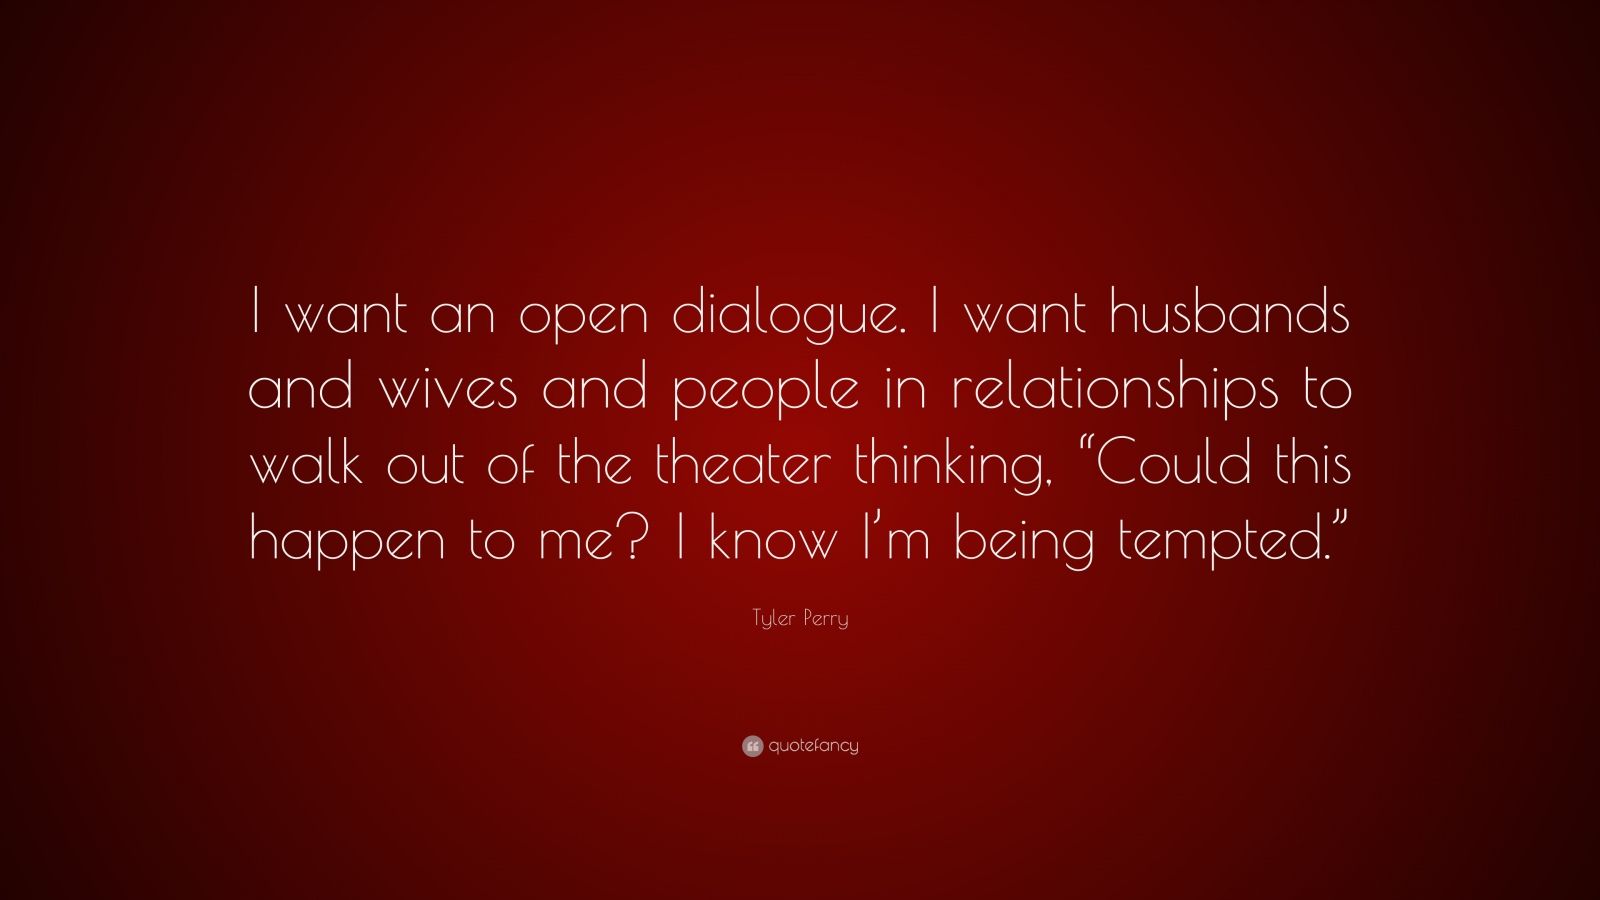 Tyler Perry Quote “I want an open dialogue I want husbands and wives